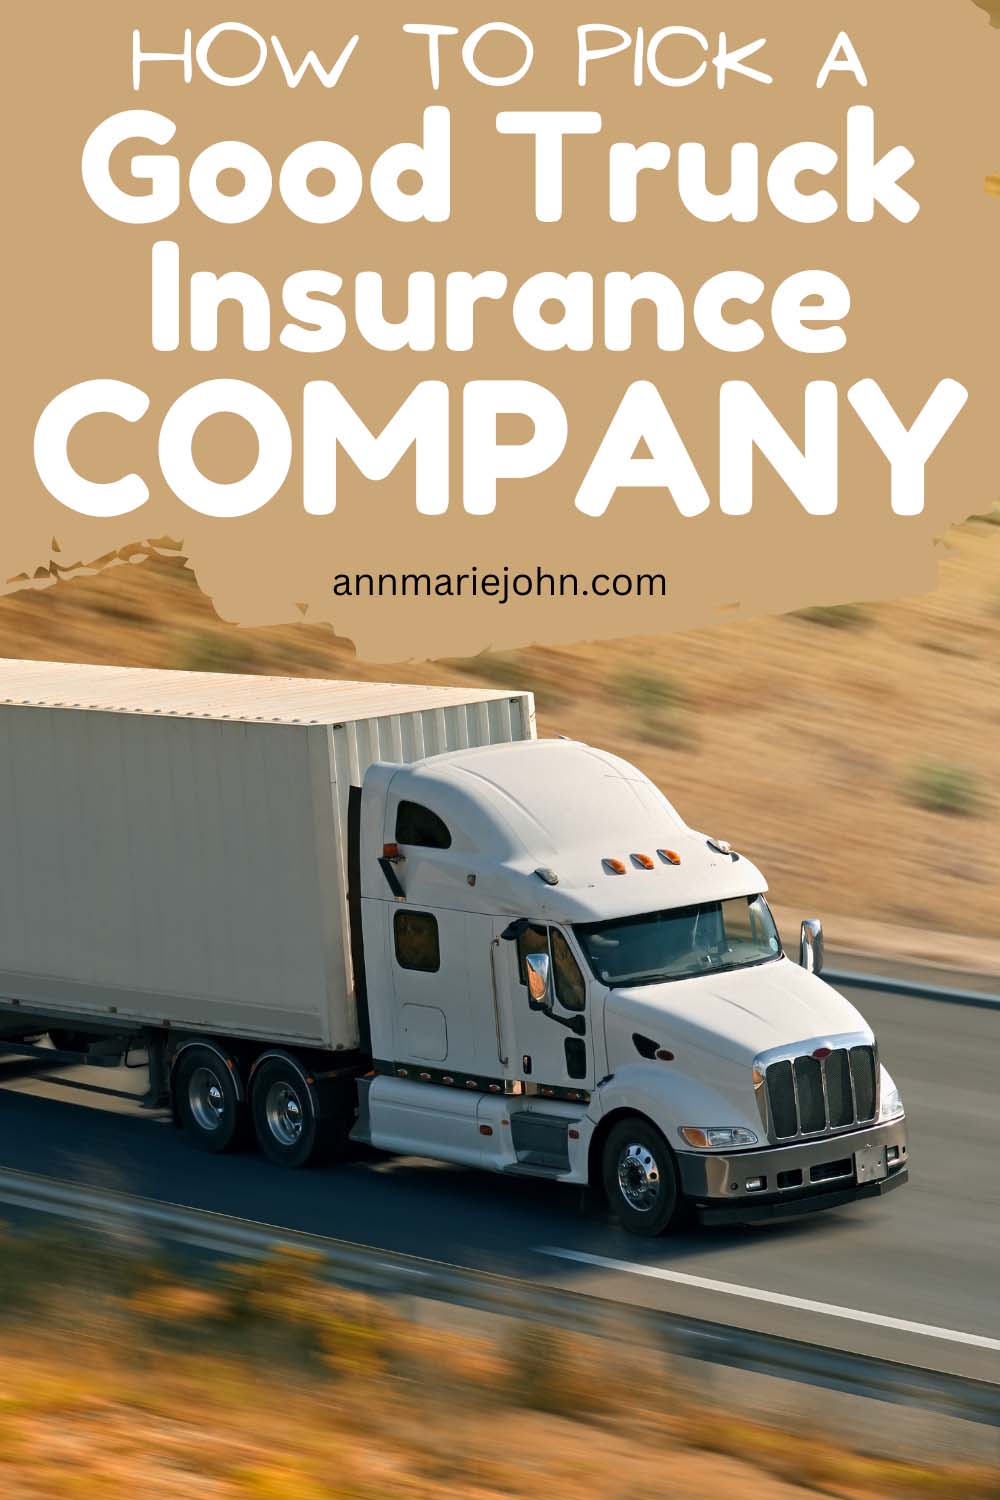 How To Pick A Good Truck Insurance Company